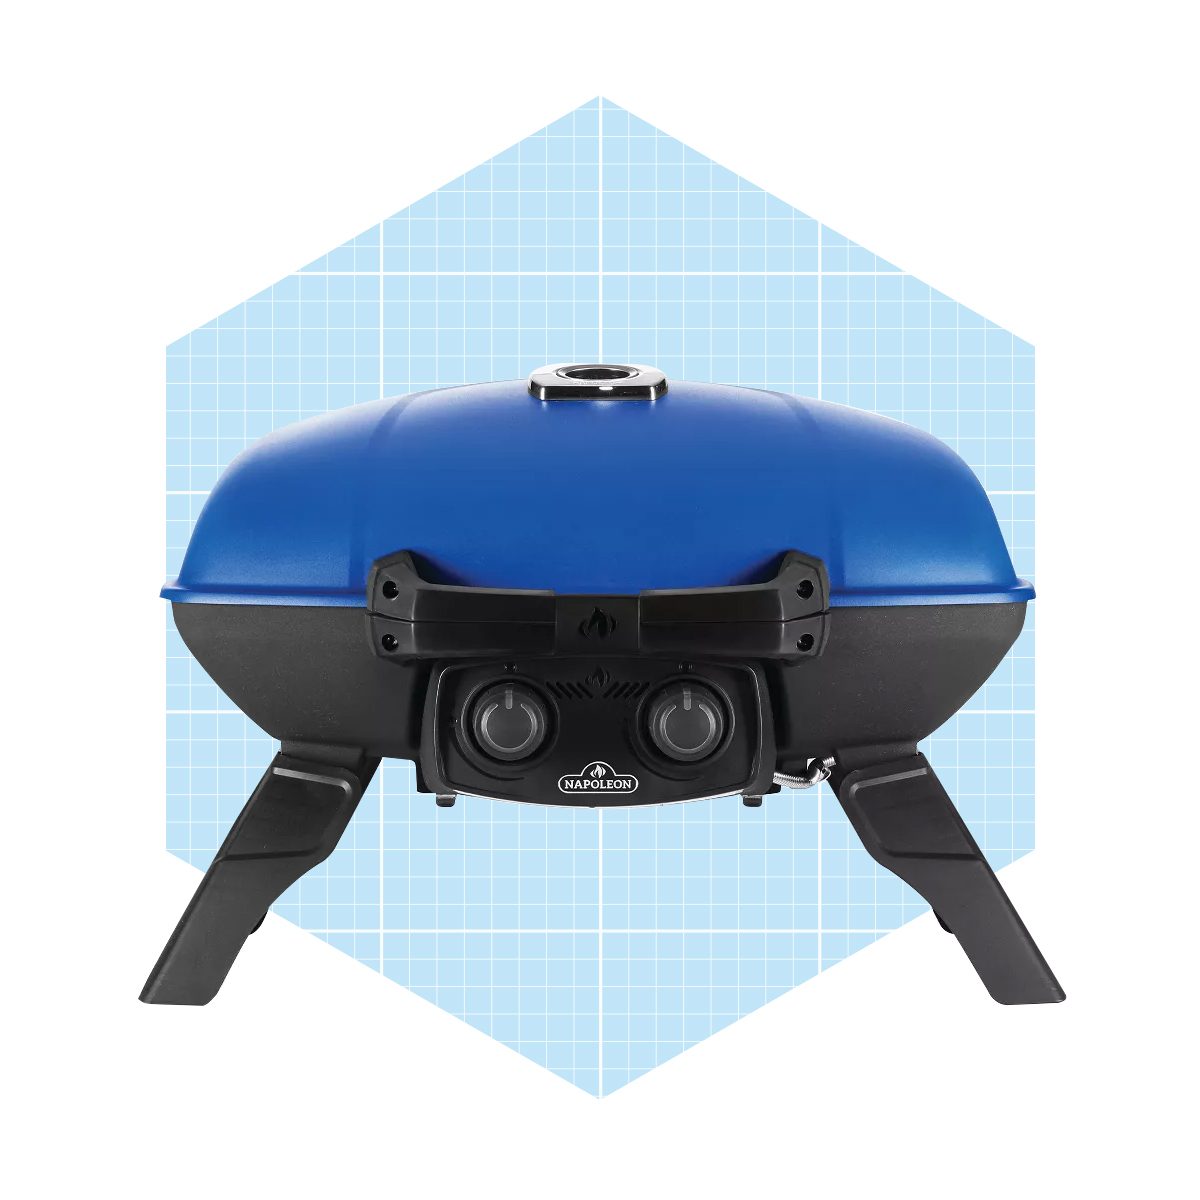 Napoleon Products Bl 1 Travelq Portable Compact Outdoor Propane Gas Grill Ecomm Target.com